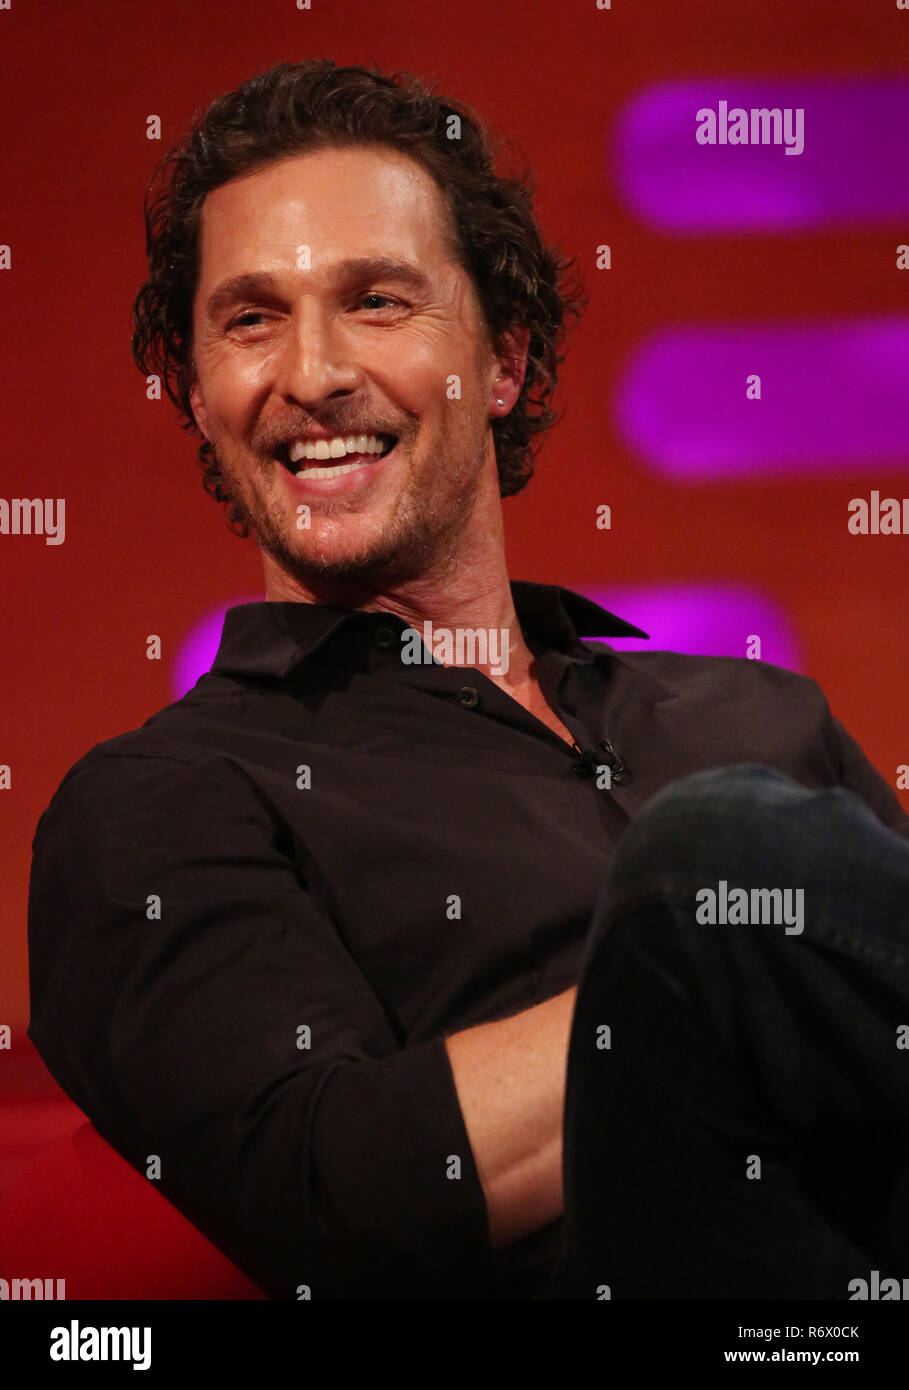 Matthew McConaughey during the filming for the Graham Norton Show at BBC Studioworks 6 Television Centre, Wood Lane, London, to be aired on BBC One on Friday evening. PRESS ASSOCIATION. Picture date: Thursday December 6, 2018. Photo credit should read: PA Images on behalf of So TV Stock Photo